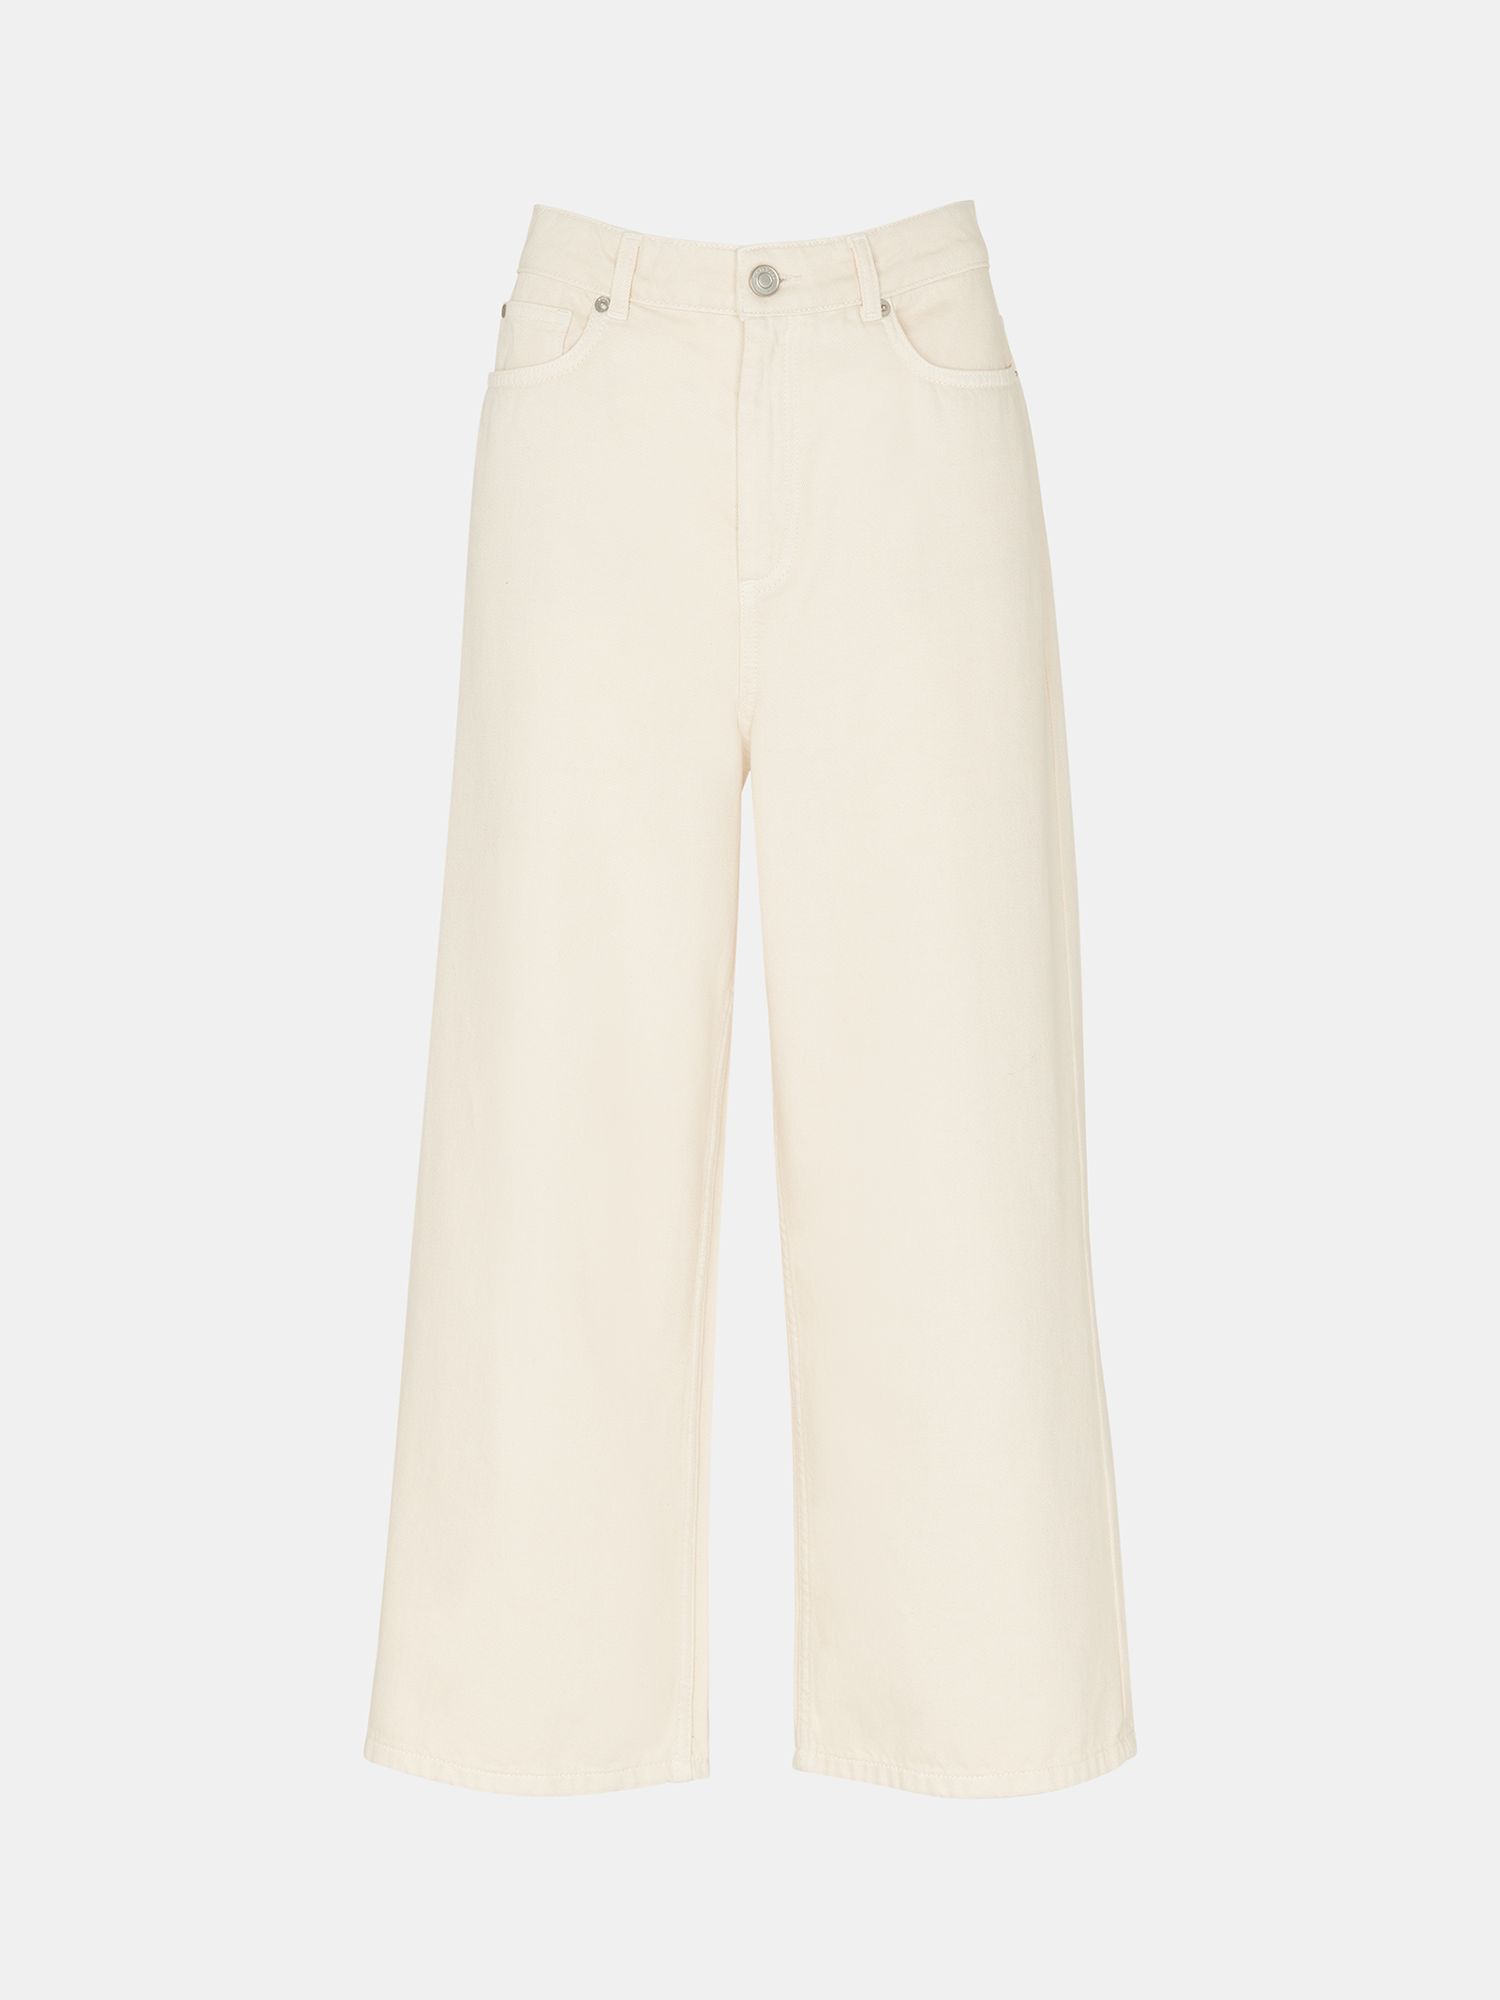 Whistles Wide Leg Cropped Jeans, White, 26